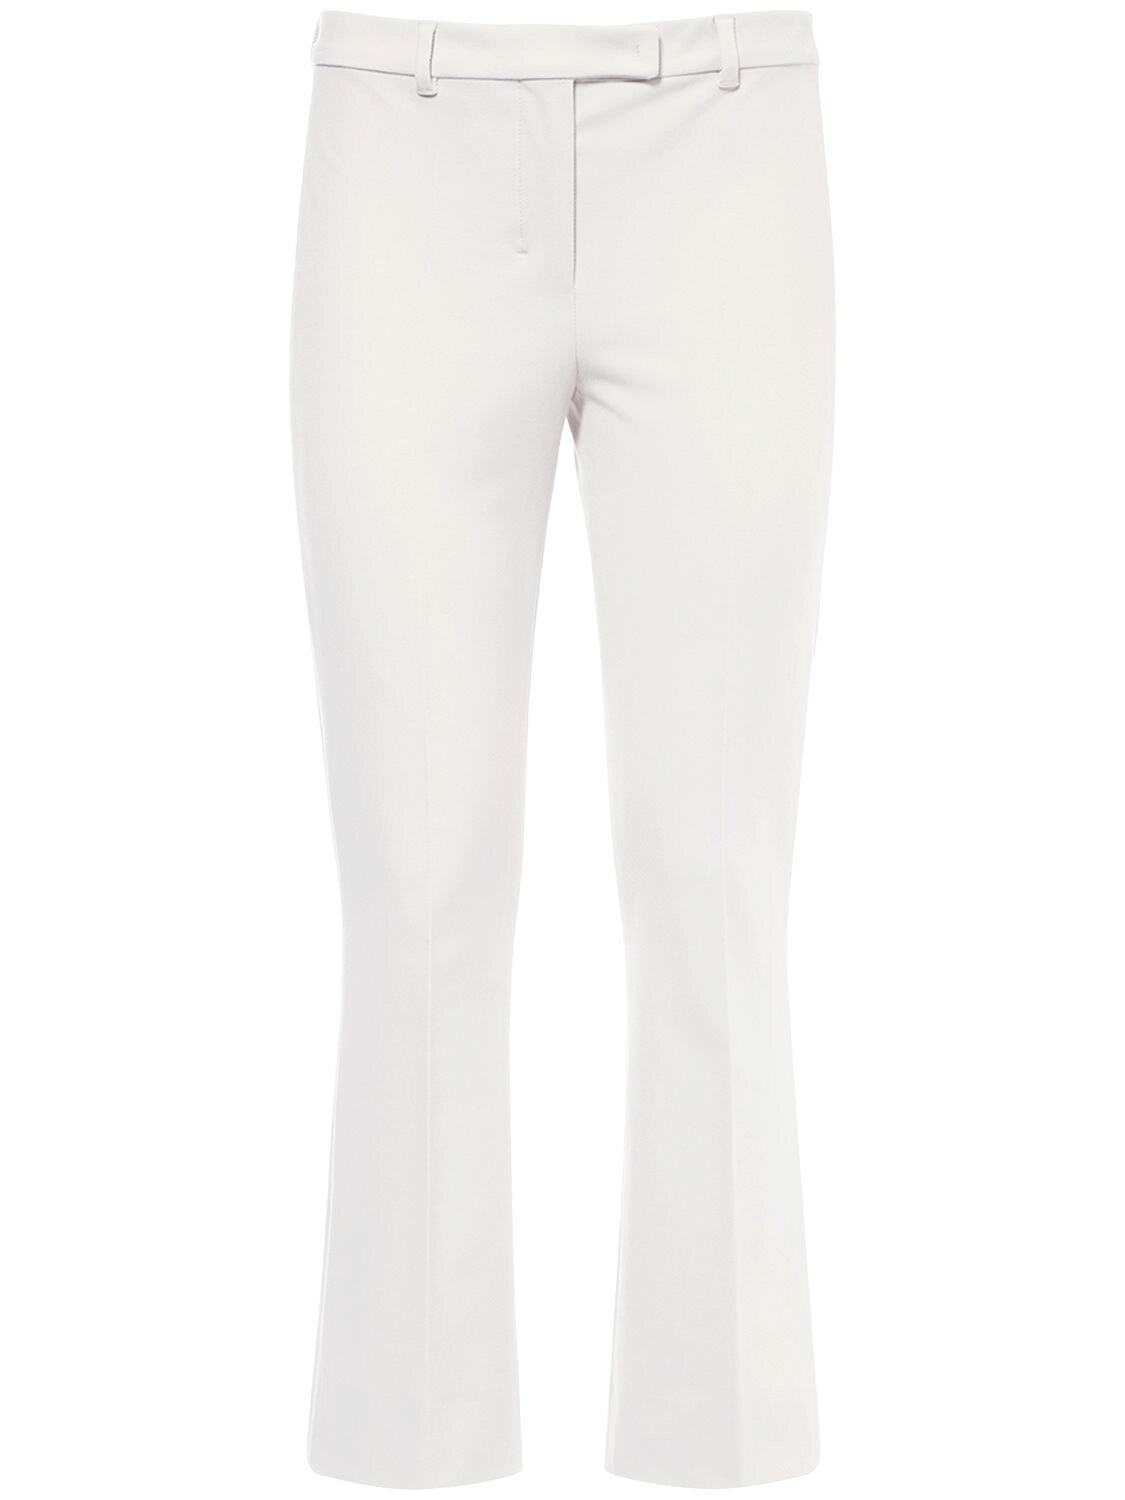 's Max Mara Cropped Stretch Cotton Twill Pants In Light Grey